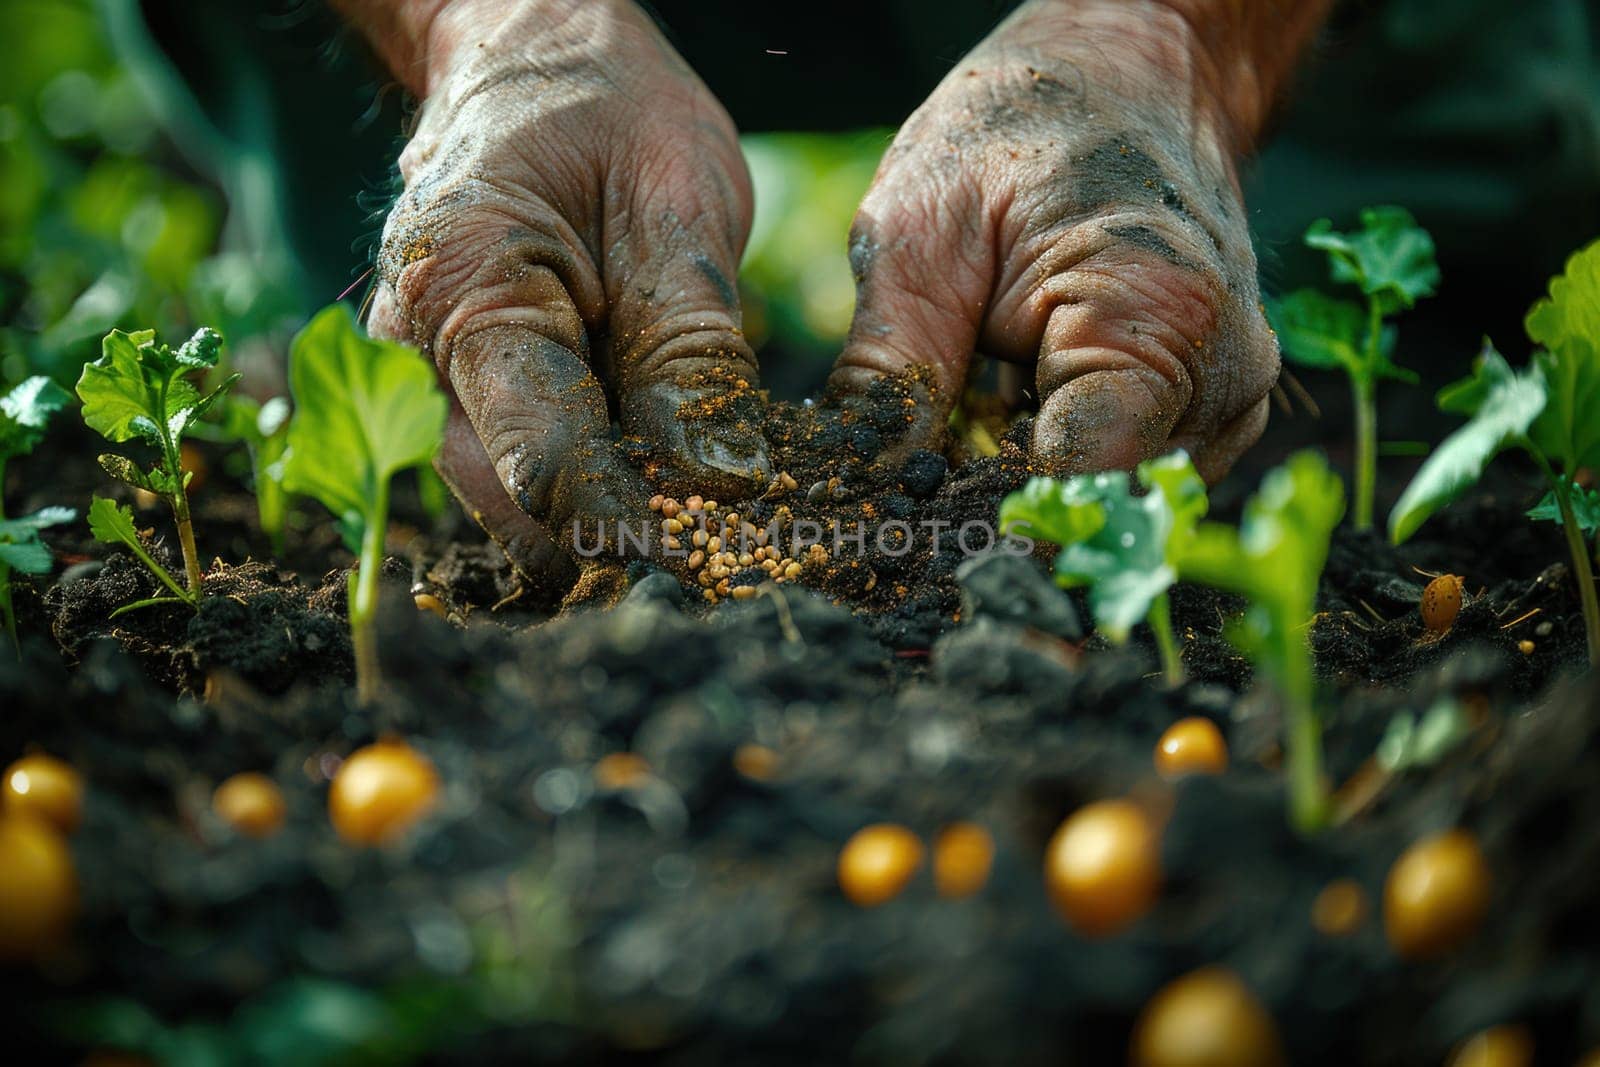 A person is shown holding a handful of dirt in their hands, displaying gardening or planting activity.